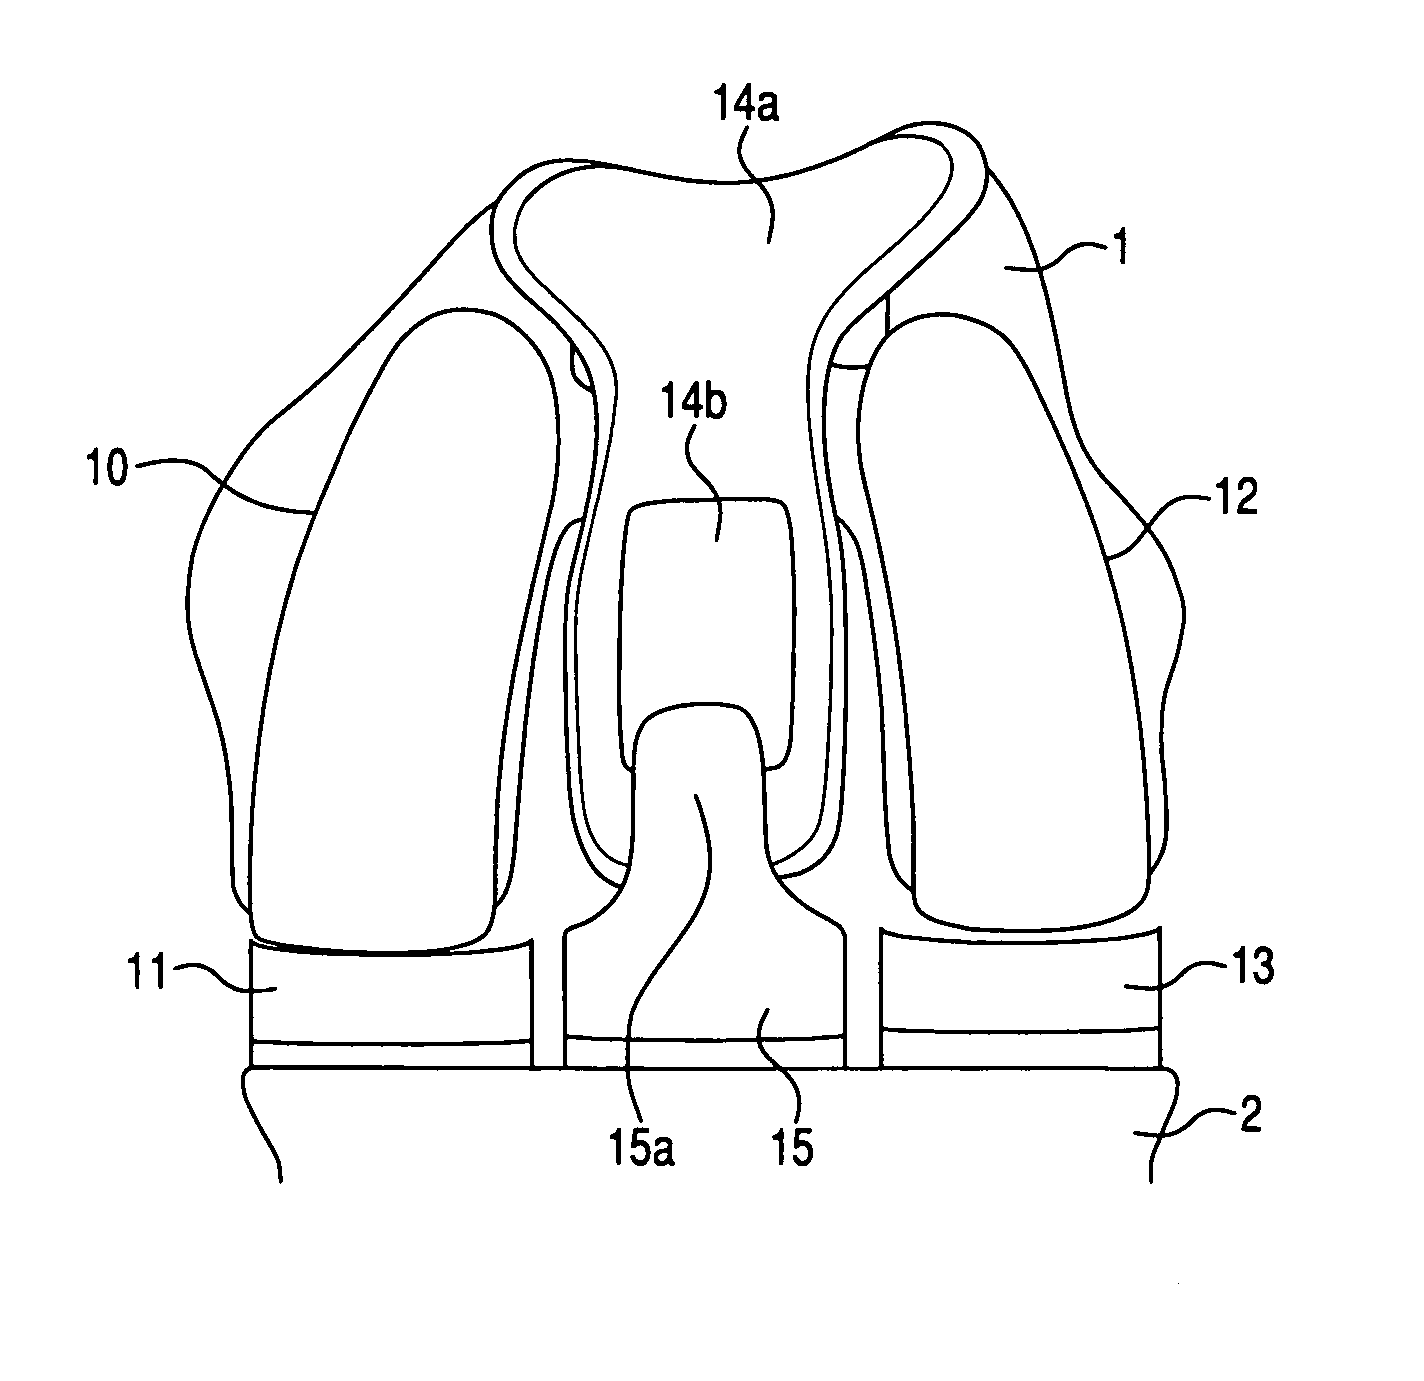 Multi-compartmental prosthetic device with patellar component transition